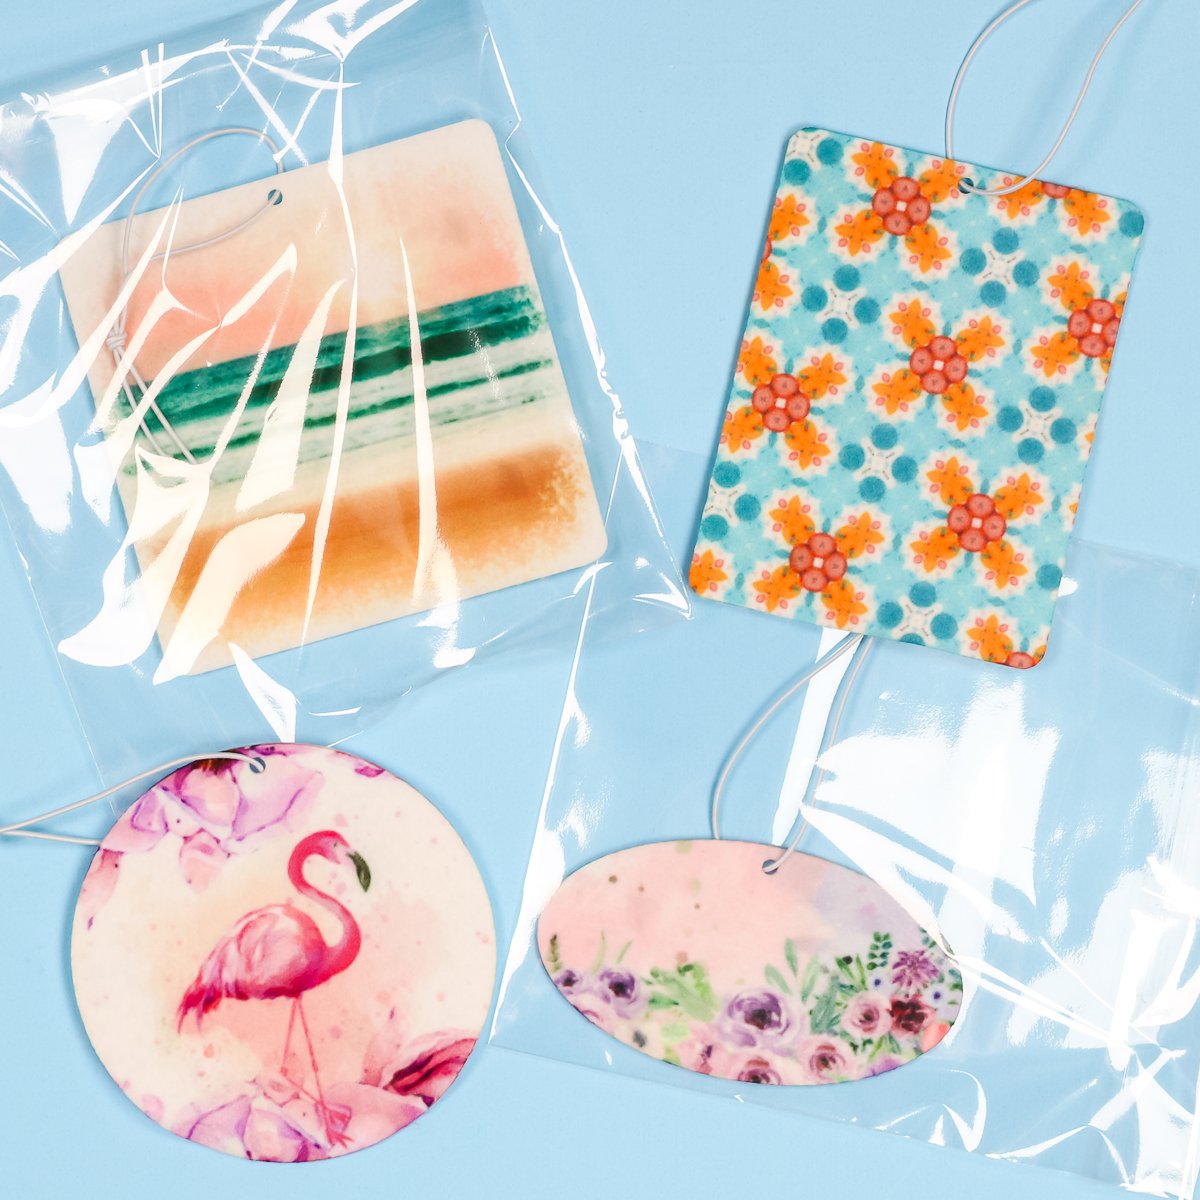 Complete and packaged sublimation air freshener.